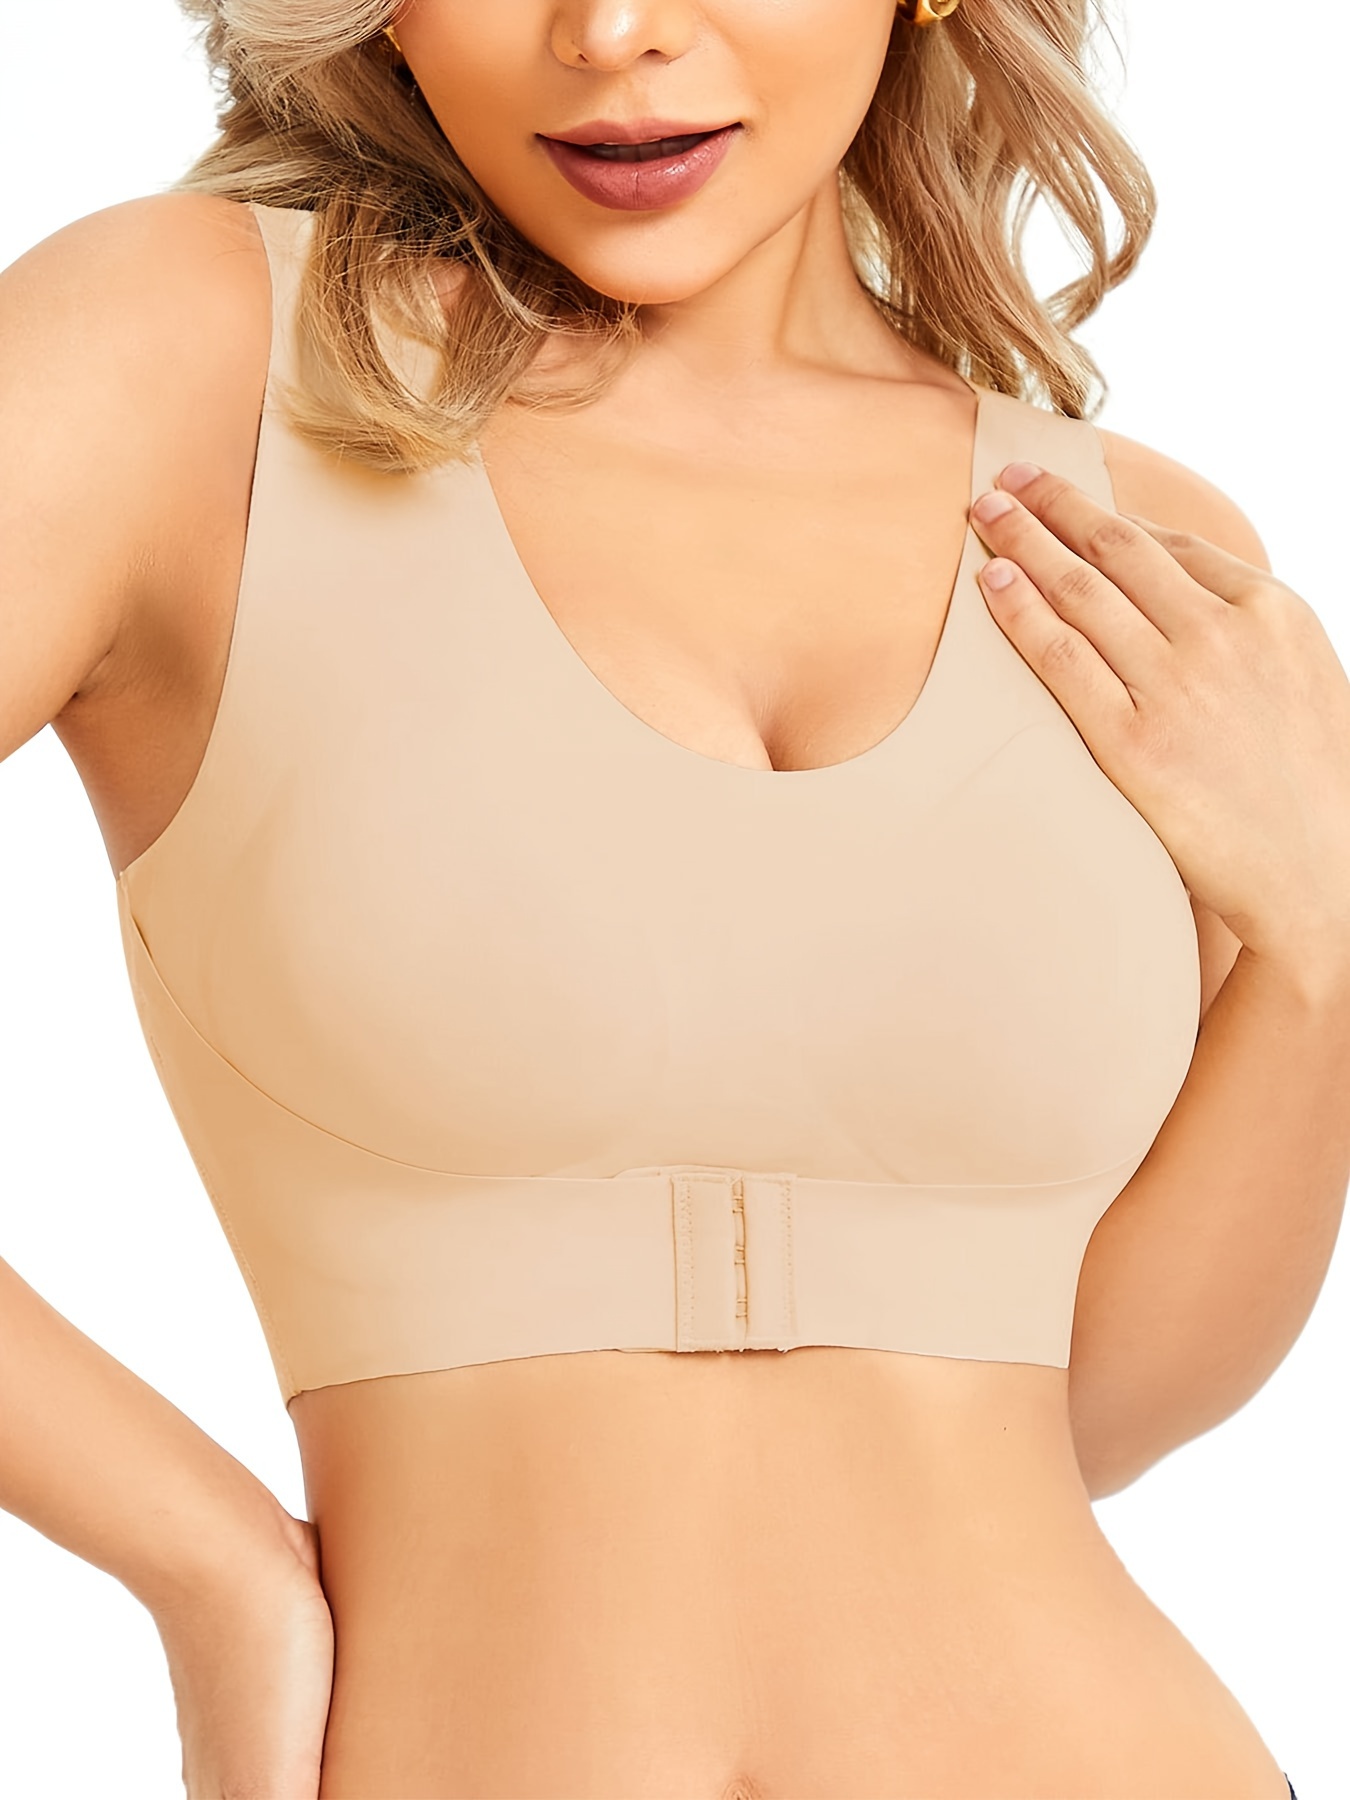 Bra for Older Women No Underwire Front Button Full Coverage Bras Hide Back  Fat Padded Seamless Wide Strap Supportive Bra